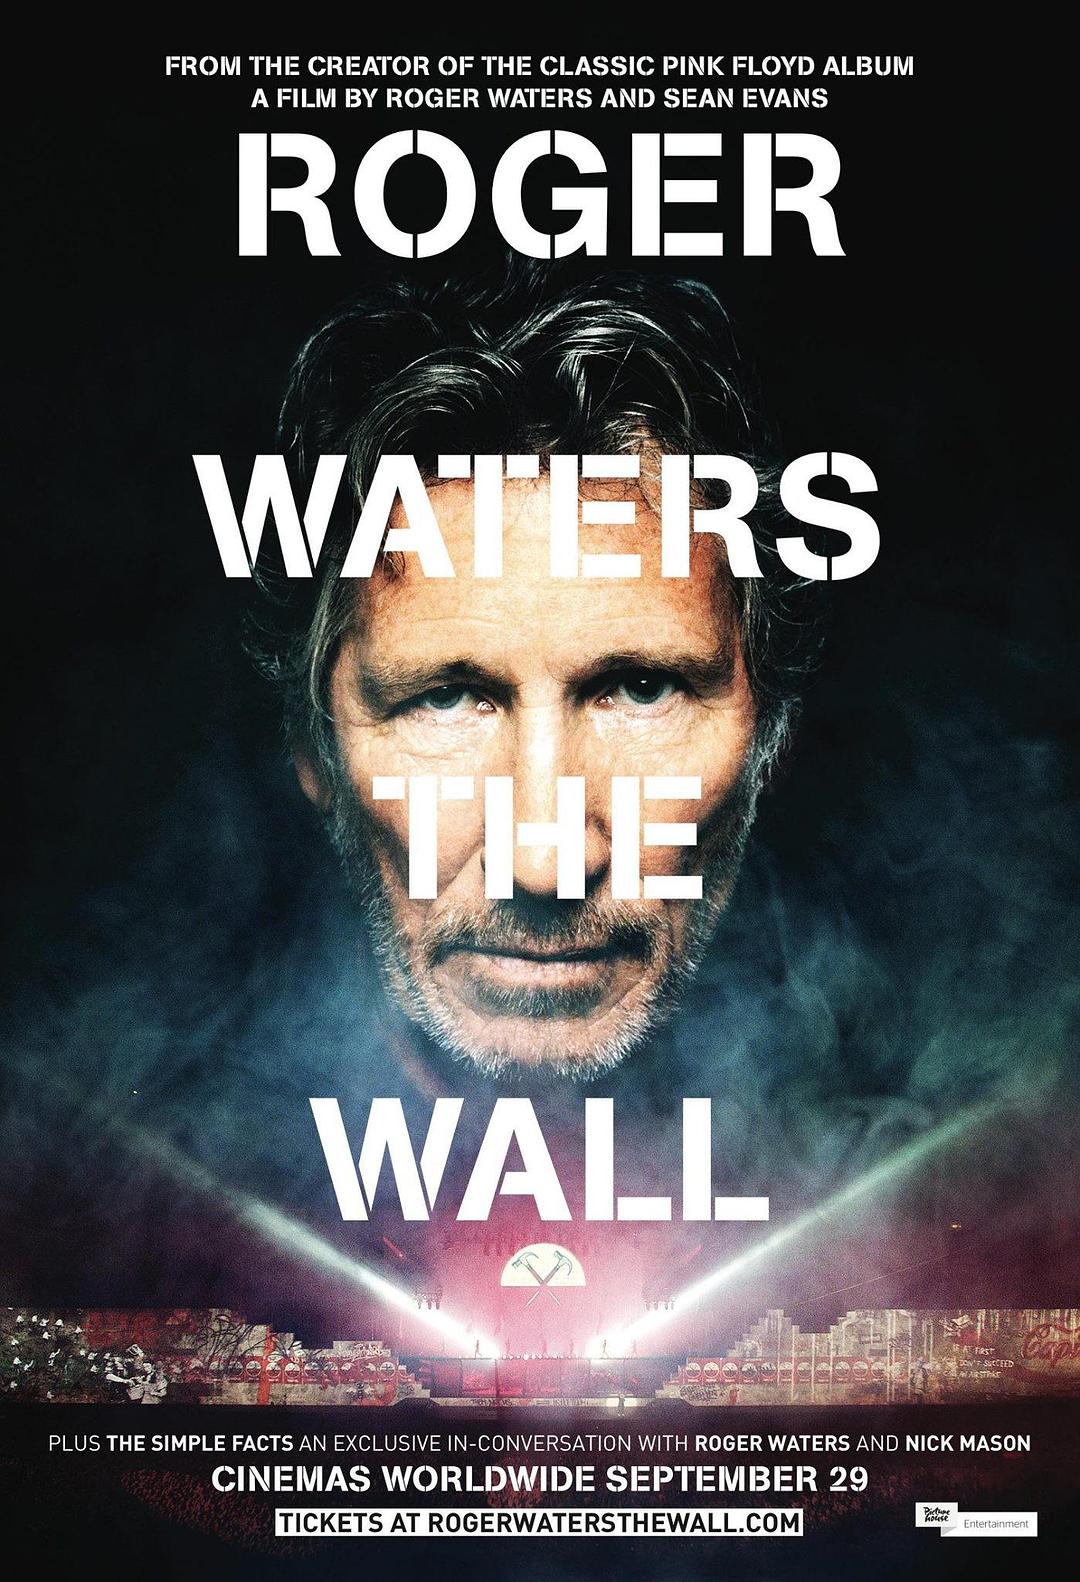 ǽ Roger.Waters.the.Wall.2014.1080p.BluRay.x264.DTS-WiKi 11.12GB-1.png